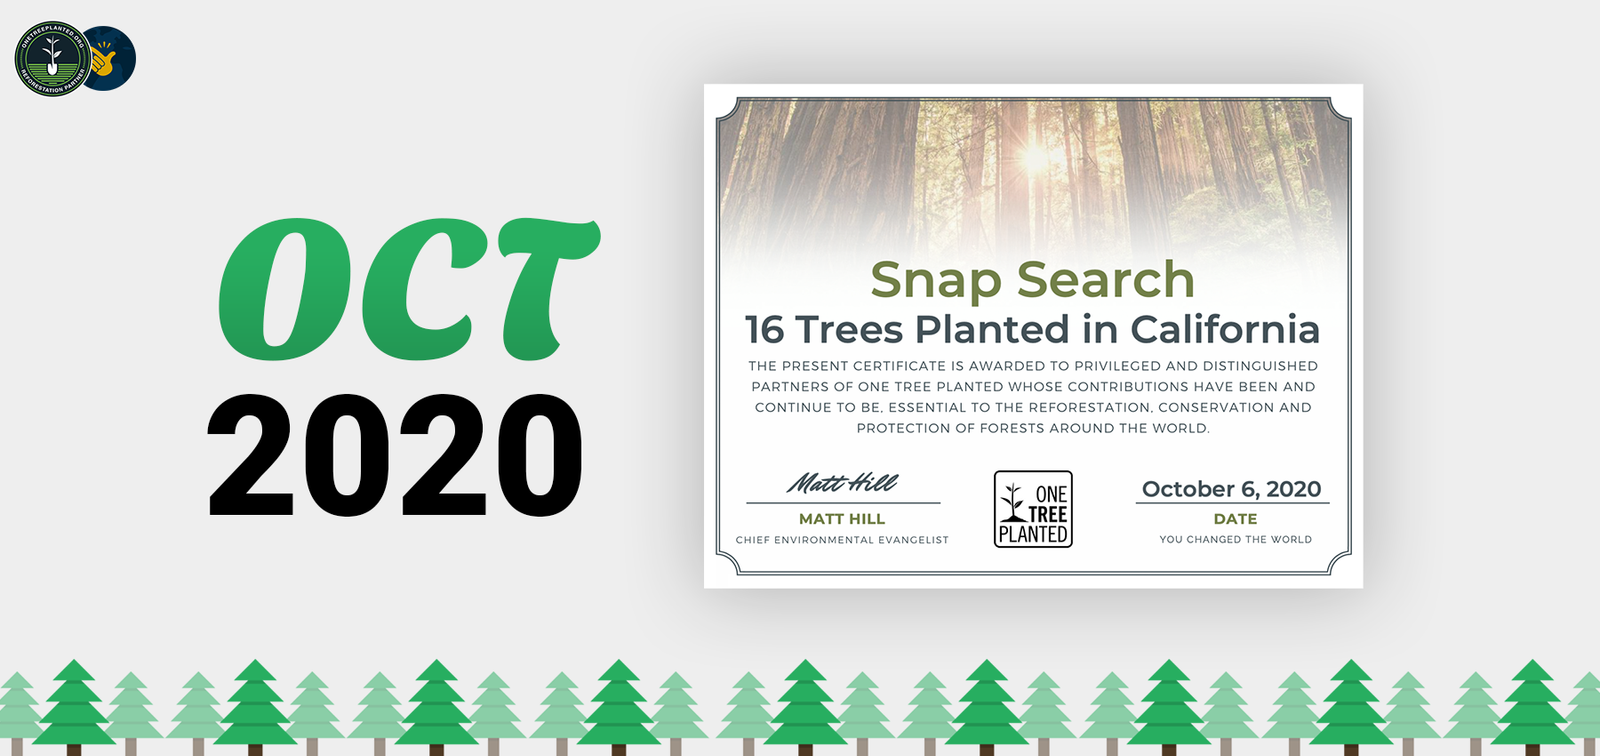 Number of trees planted in October 2020